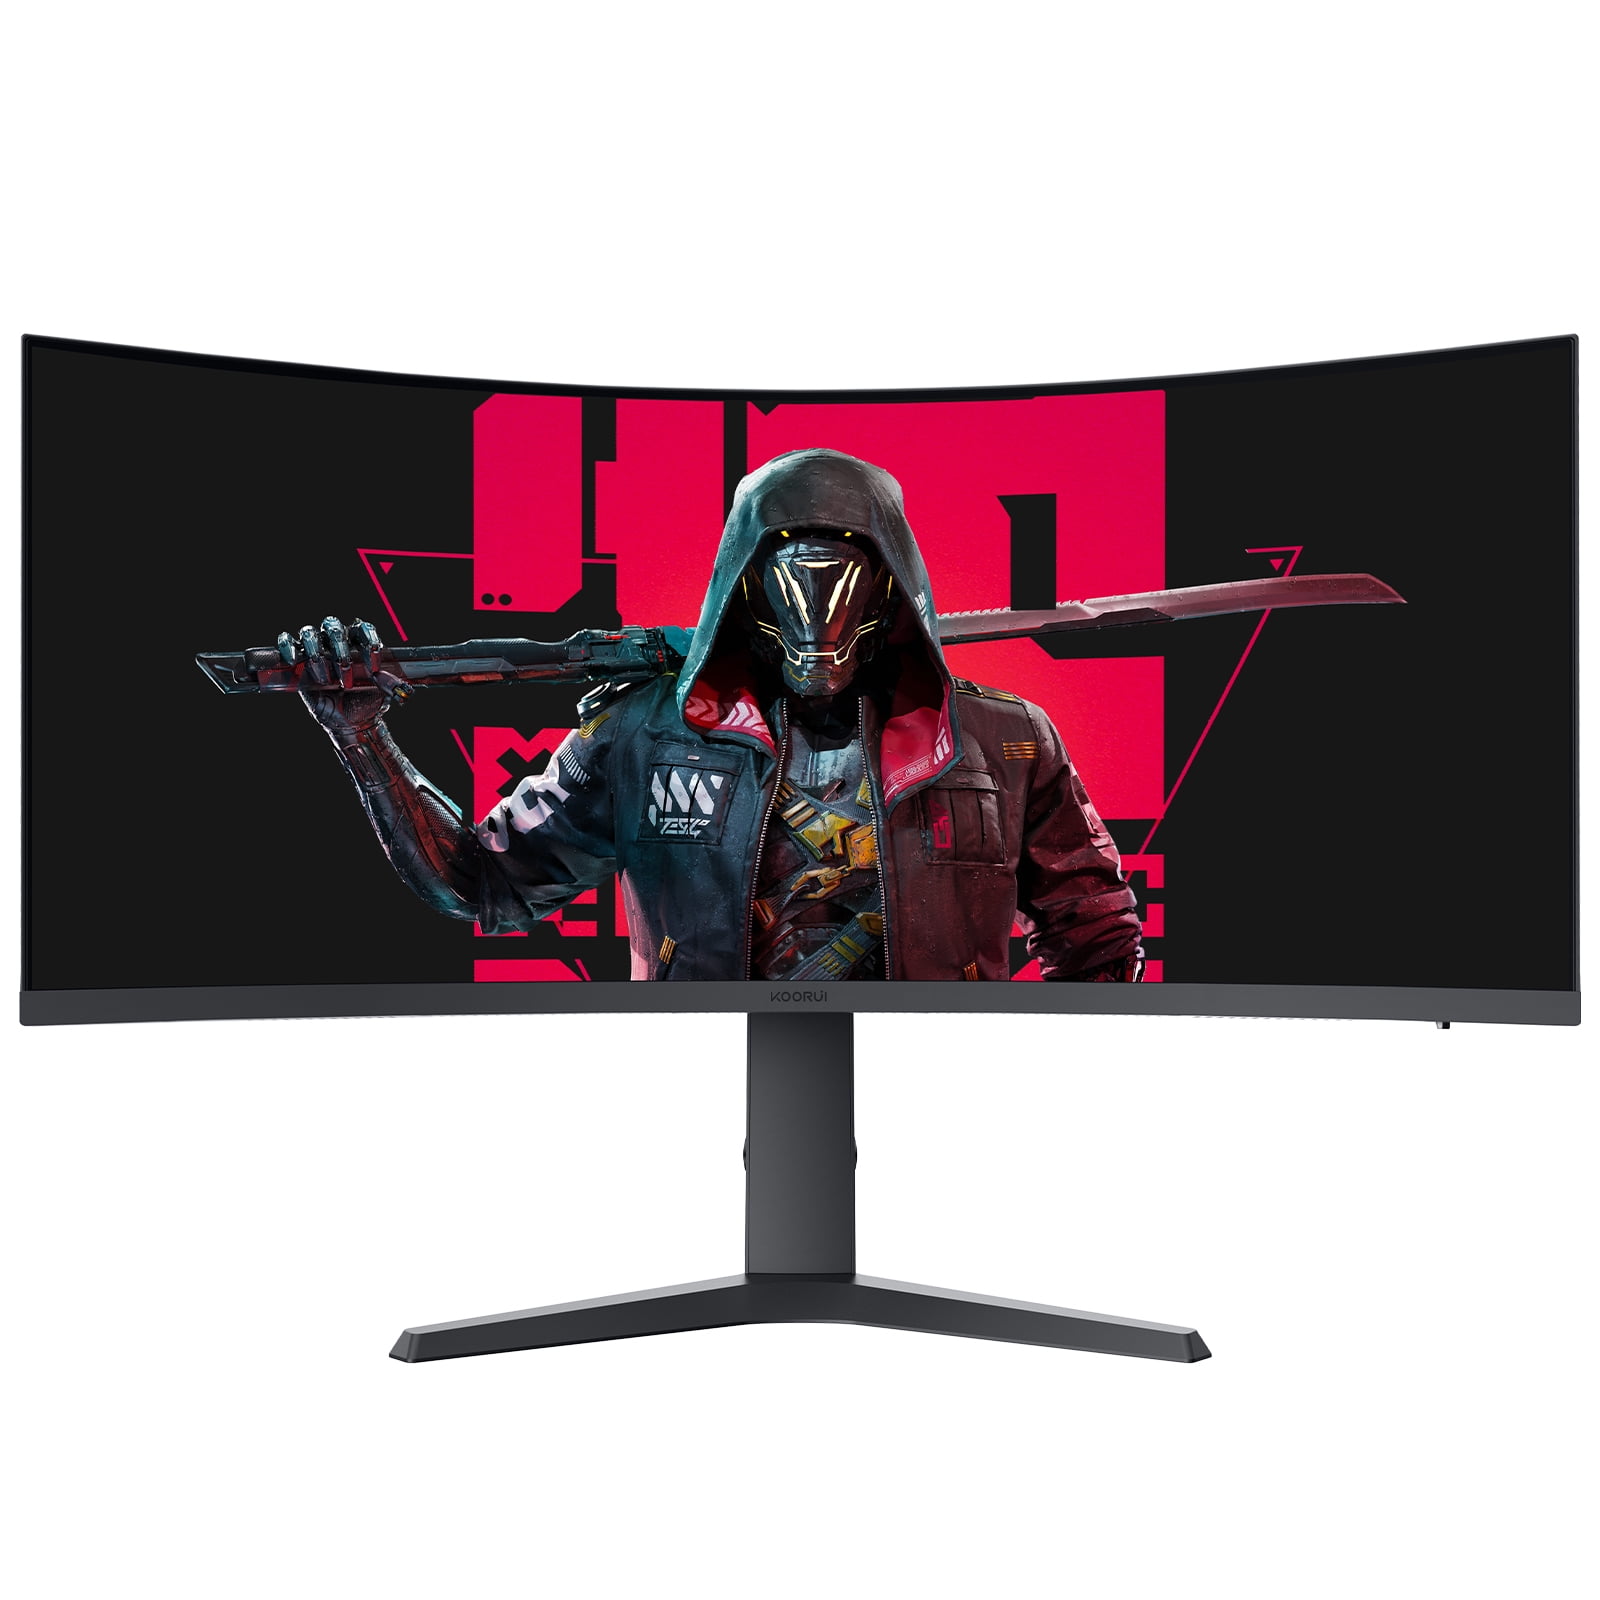 UltraGear Monitor Gaming (34GN850-B) (3440 21: with 34 34GN850-B 1440) IPS Inch 1ms QHD - G-SYNC and Black 9 144Hz LG Nano Curved x Compatibility